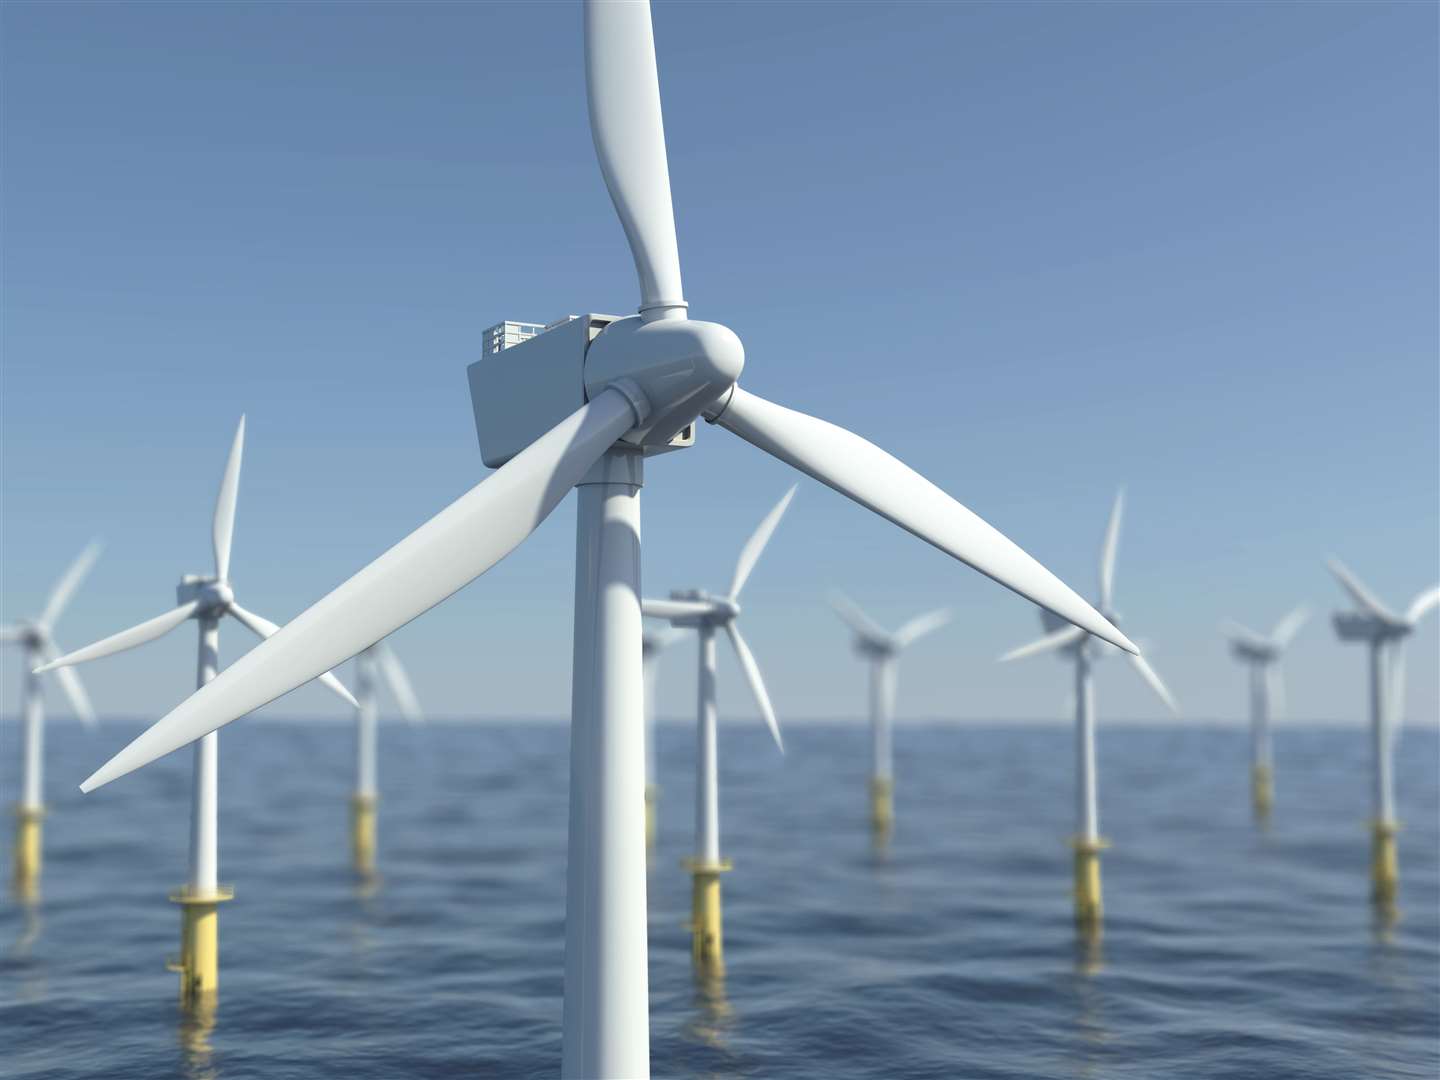 The document outlines sites which could help Scotland produce a further 8GW of offshore wind by 2030.